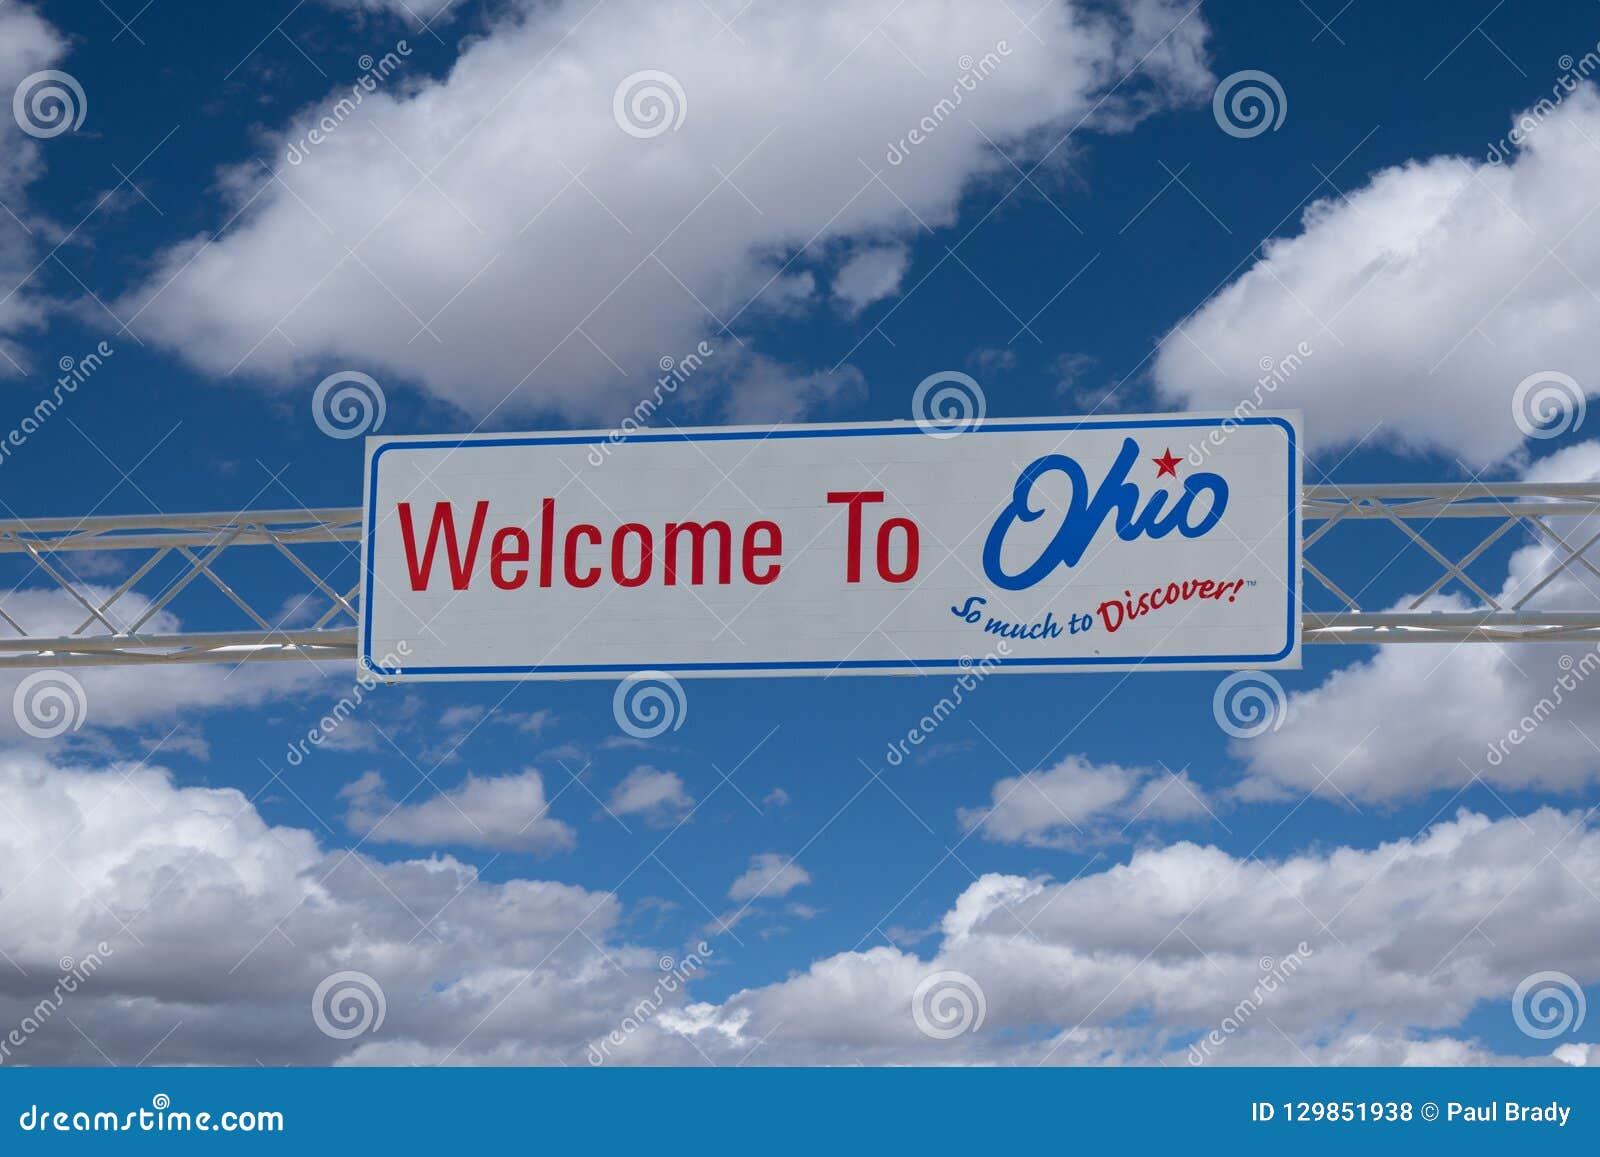 welcome to ohio sign